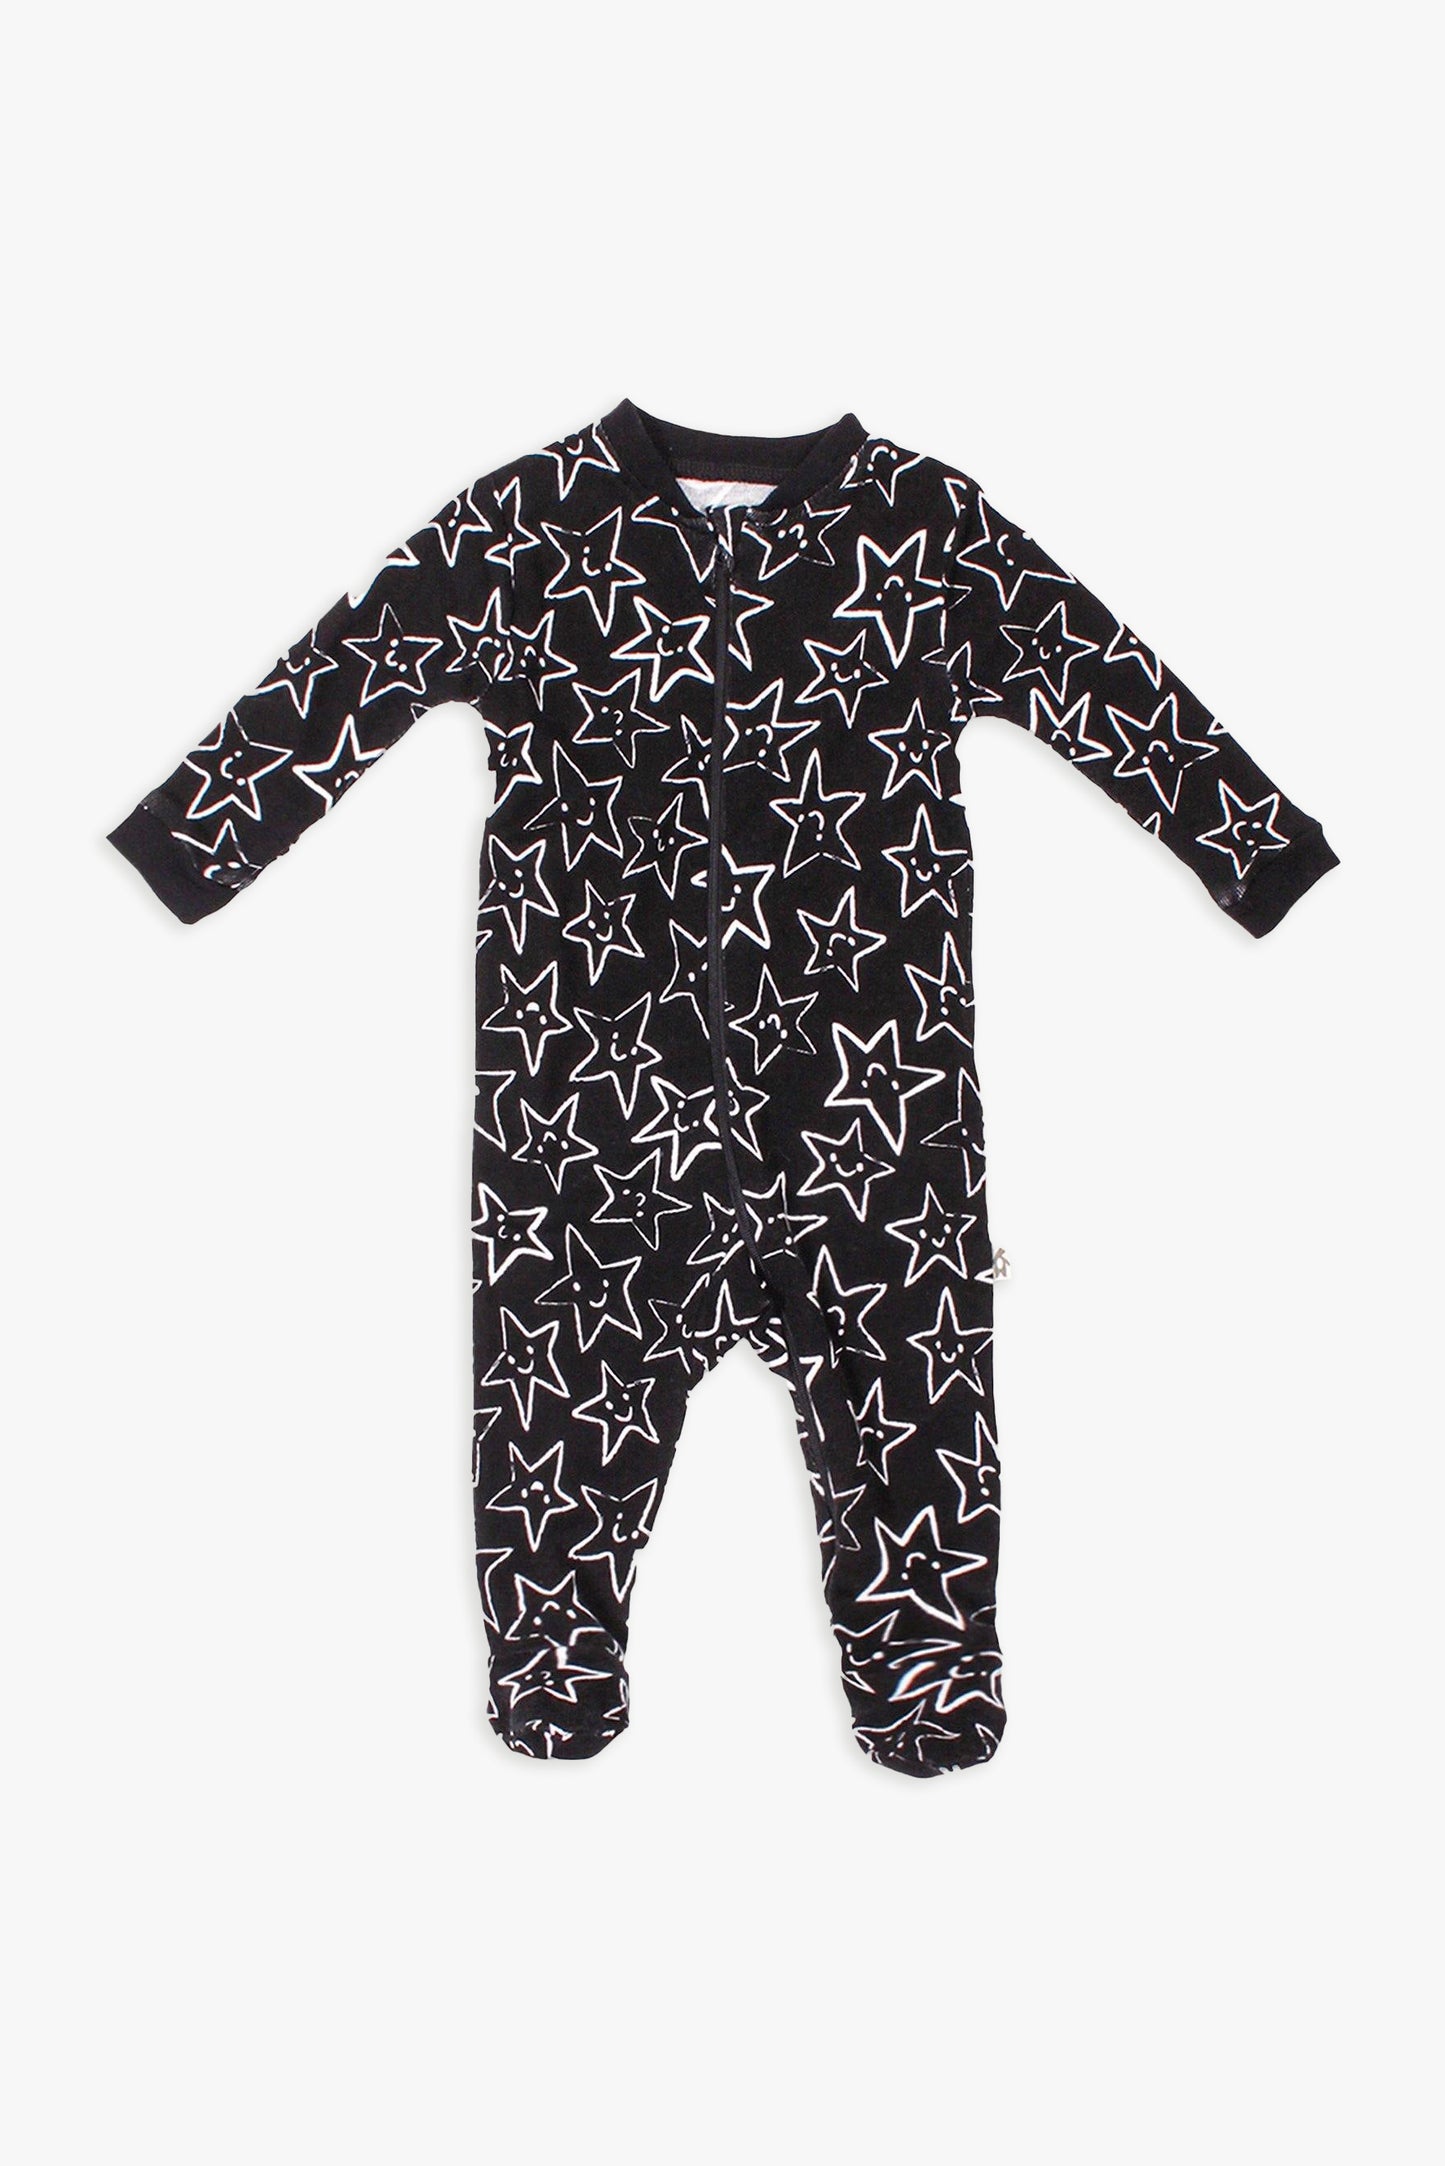 Snugabye Black & White Stars Footed Sleeper with Front Zip